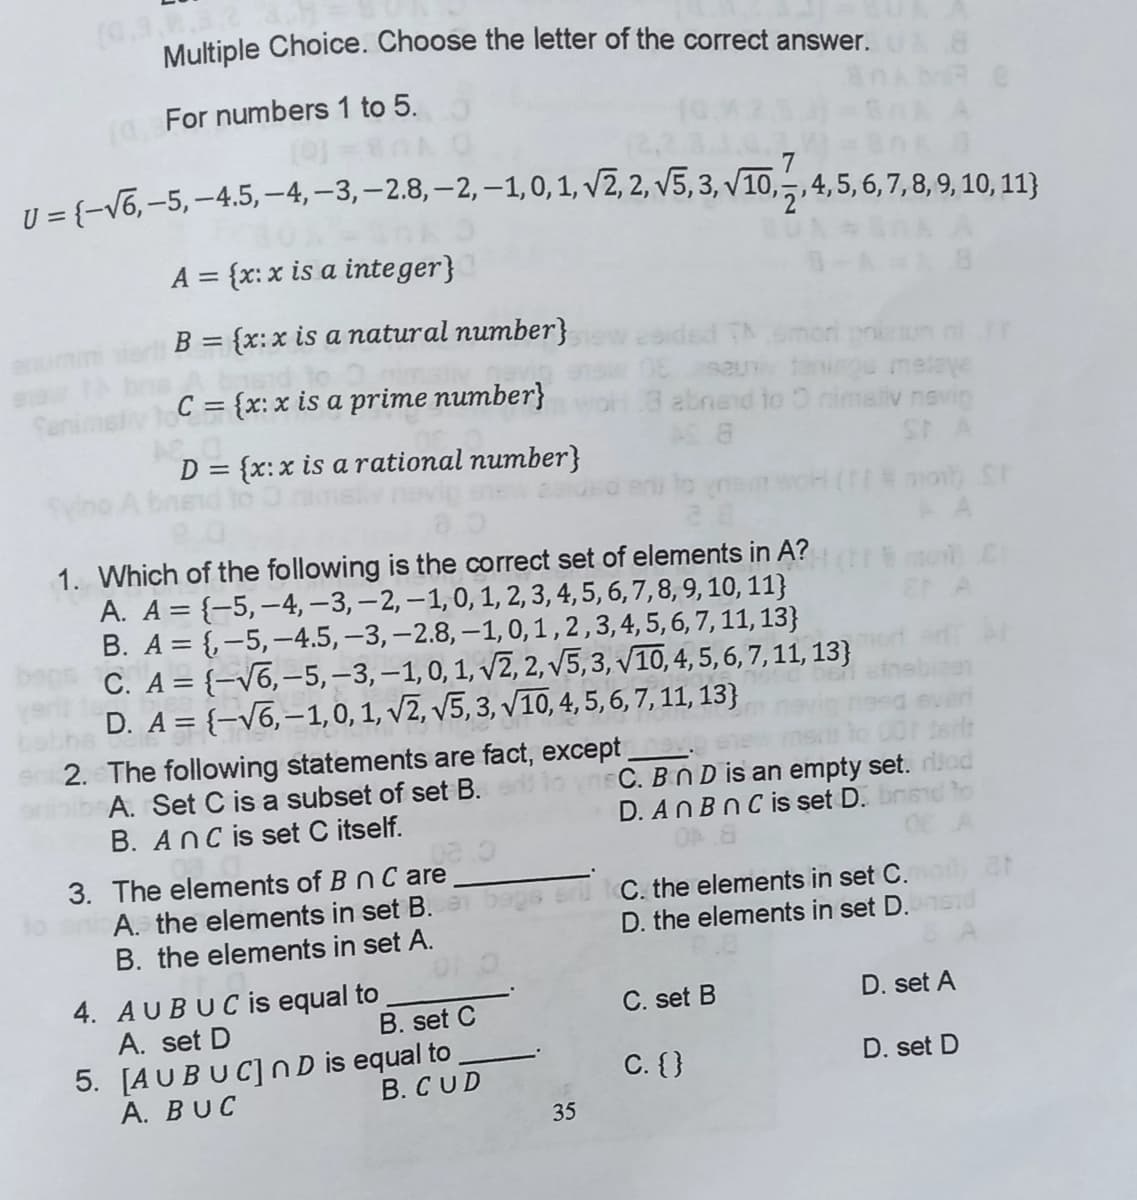 (G.3.8.3.2
Multiple Choice. Choose the letter of the correct answer.
For numbers 1 to 5.
U ={-V6, -5, -4.5, -4,-3,–2.8, – 2, –1, 0, 1, v2, 2, v5, 3, v10,,4,5,6,7,8, 9, 10, 11)}
A = {x: x is a inte ger}
%3D
B = {x:x is a natural number}
%3D
esided Th moni pren
taiege meleye
3 abnand to O nimaliv navig
AS 8
eum
Senimet
C = {x: x is a prime number}
D = {x:x is a rational number}
ST A
%3D
1. Which of the following is the correct set of elements in A?
A. A = {-5,-4, – 3, – 2, –1,0, 1, 2, 3, 4, 5, 6, 7, 8, 9, 10, 11}
B. A = {-5,–4.5, –3, -2.8, –1, 0, 1 , 2,3,4, 5, 6,7,11, 13}
C. A = {-v6,-5, –3, –1,0, 1, v2, 2, V5, 3, V10, 4, 5, 6, 7,11, 13}
D. A = {-V6,-1,0, 1, V2, V5, 3, v10, 4, 5, 6, 7, 11, 13}
2. The following statements are fact, except
A. Set C is a subset of set B.
nsC. BnD is an empty set.
D. ANBNC is set D.
B. Anc is set C itself.
3. The elements of B nC are
A. the elements in set B.
B. the elements in set A.
C. the elements in set C.
D. the elements in set D.
4. AUBUCis equal to
A. set D
5. [AUBUC]ND is equal to
A. BUC
C. set B
D. set A
B. set C
C. {}
D. set D
B. CUD
35
